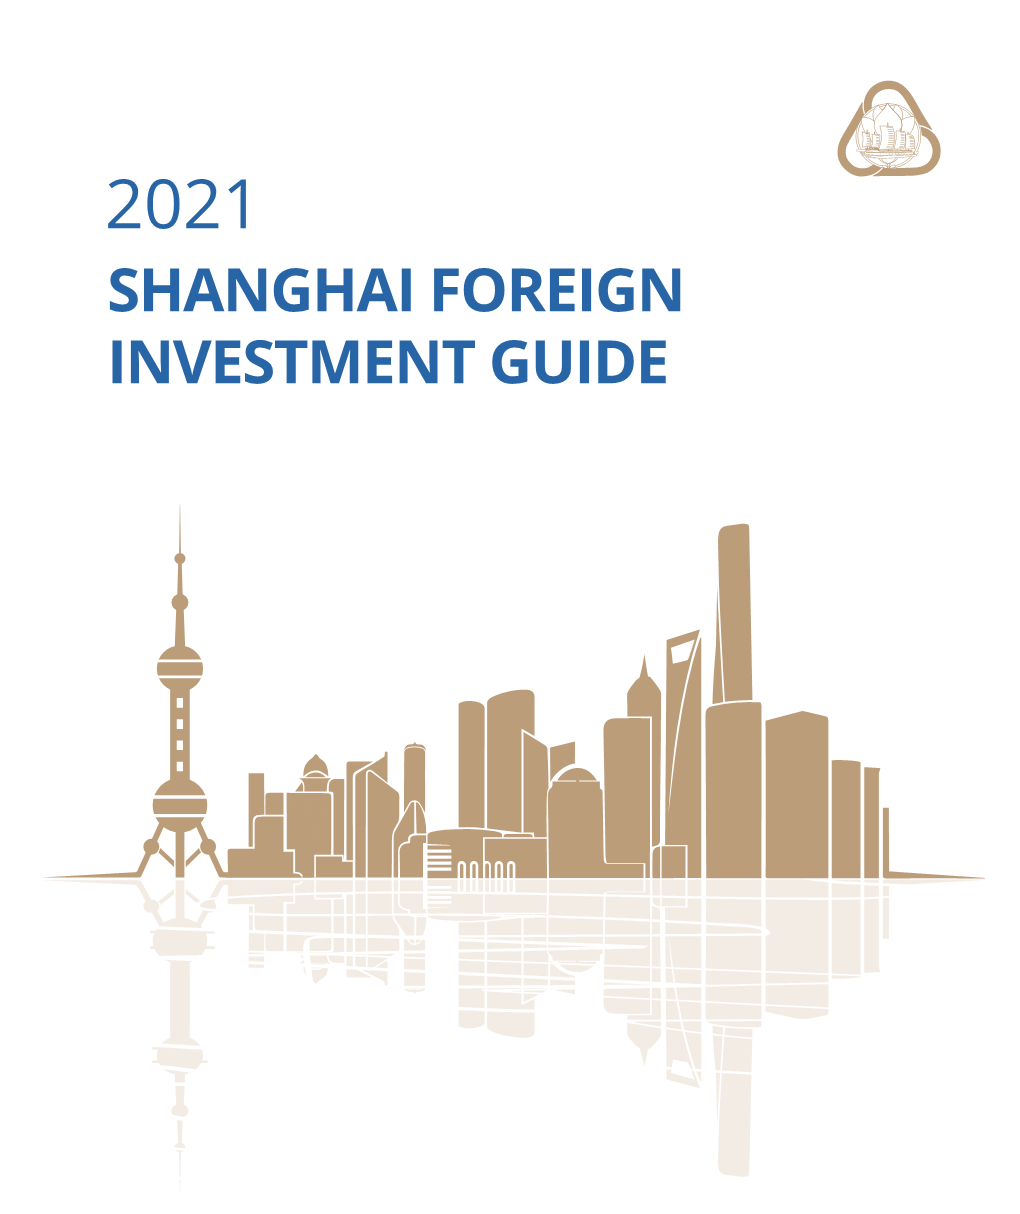 SHANGHAI FOREIGN INVESTMENT GUIDE Preface